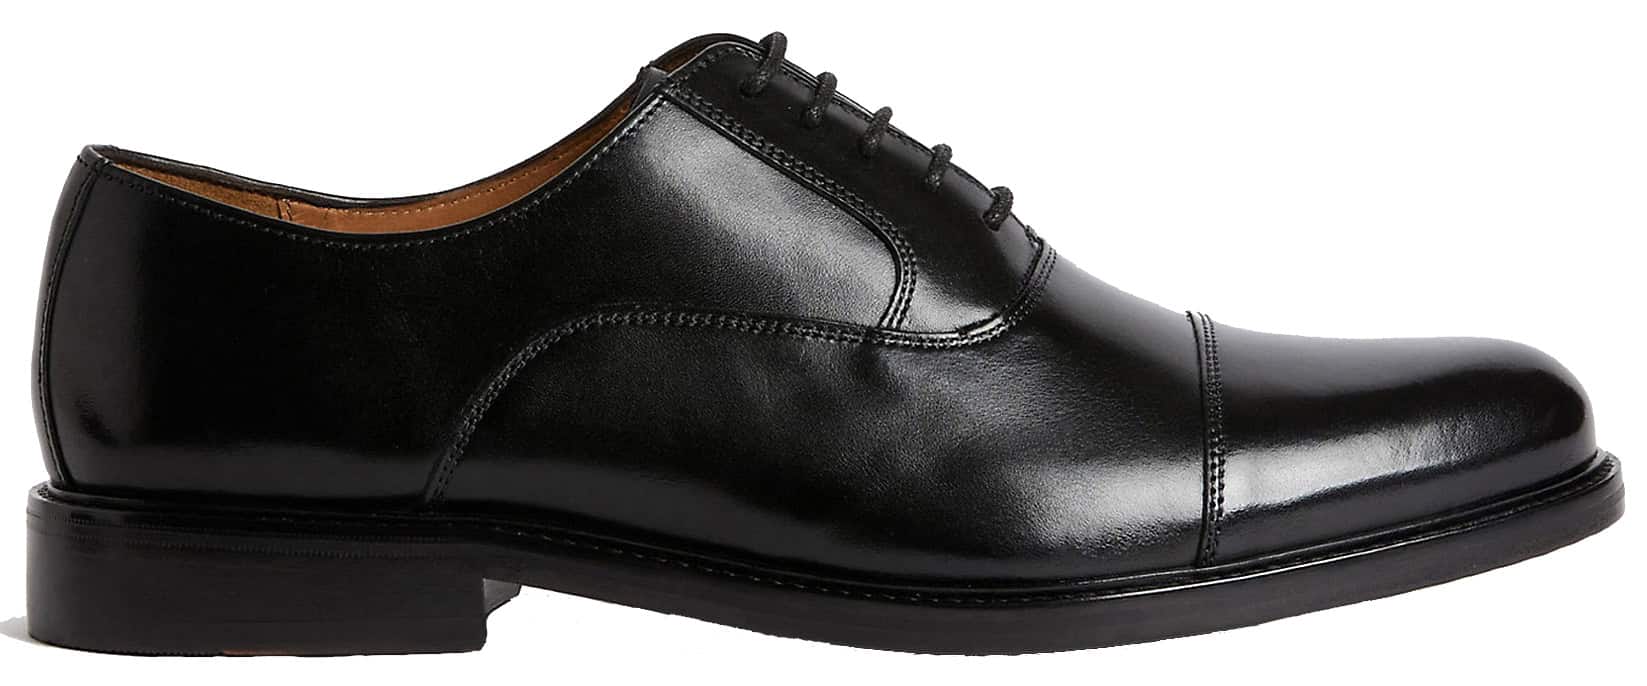 M&S SARTORIAL Leather Oxford Shoes